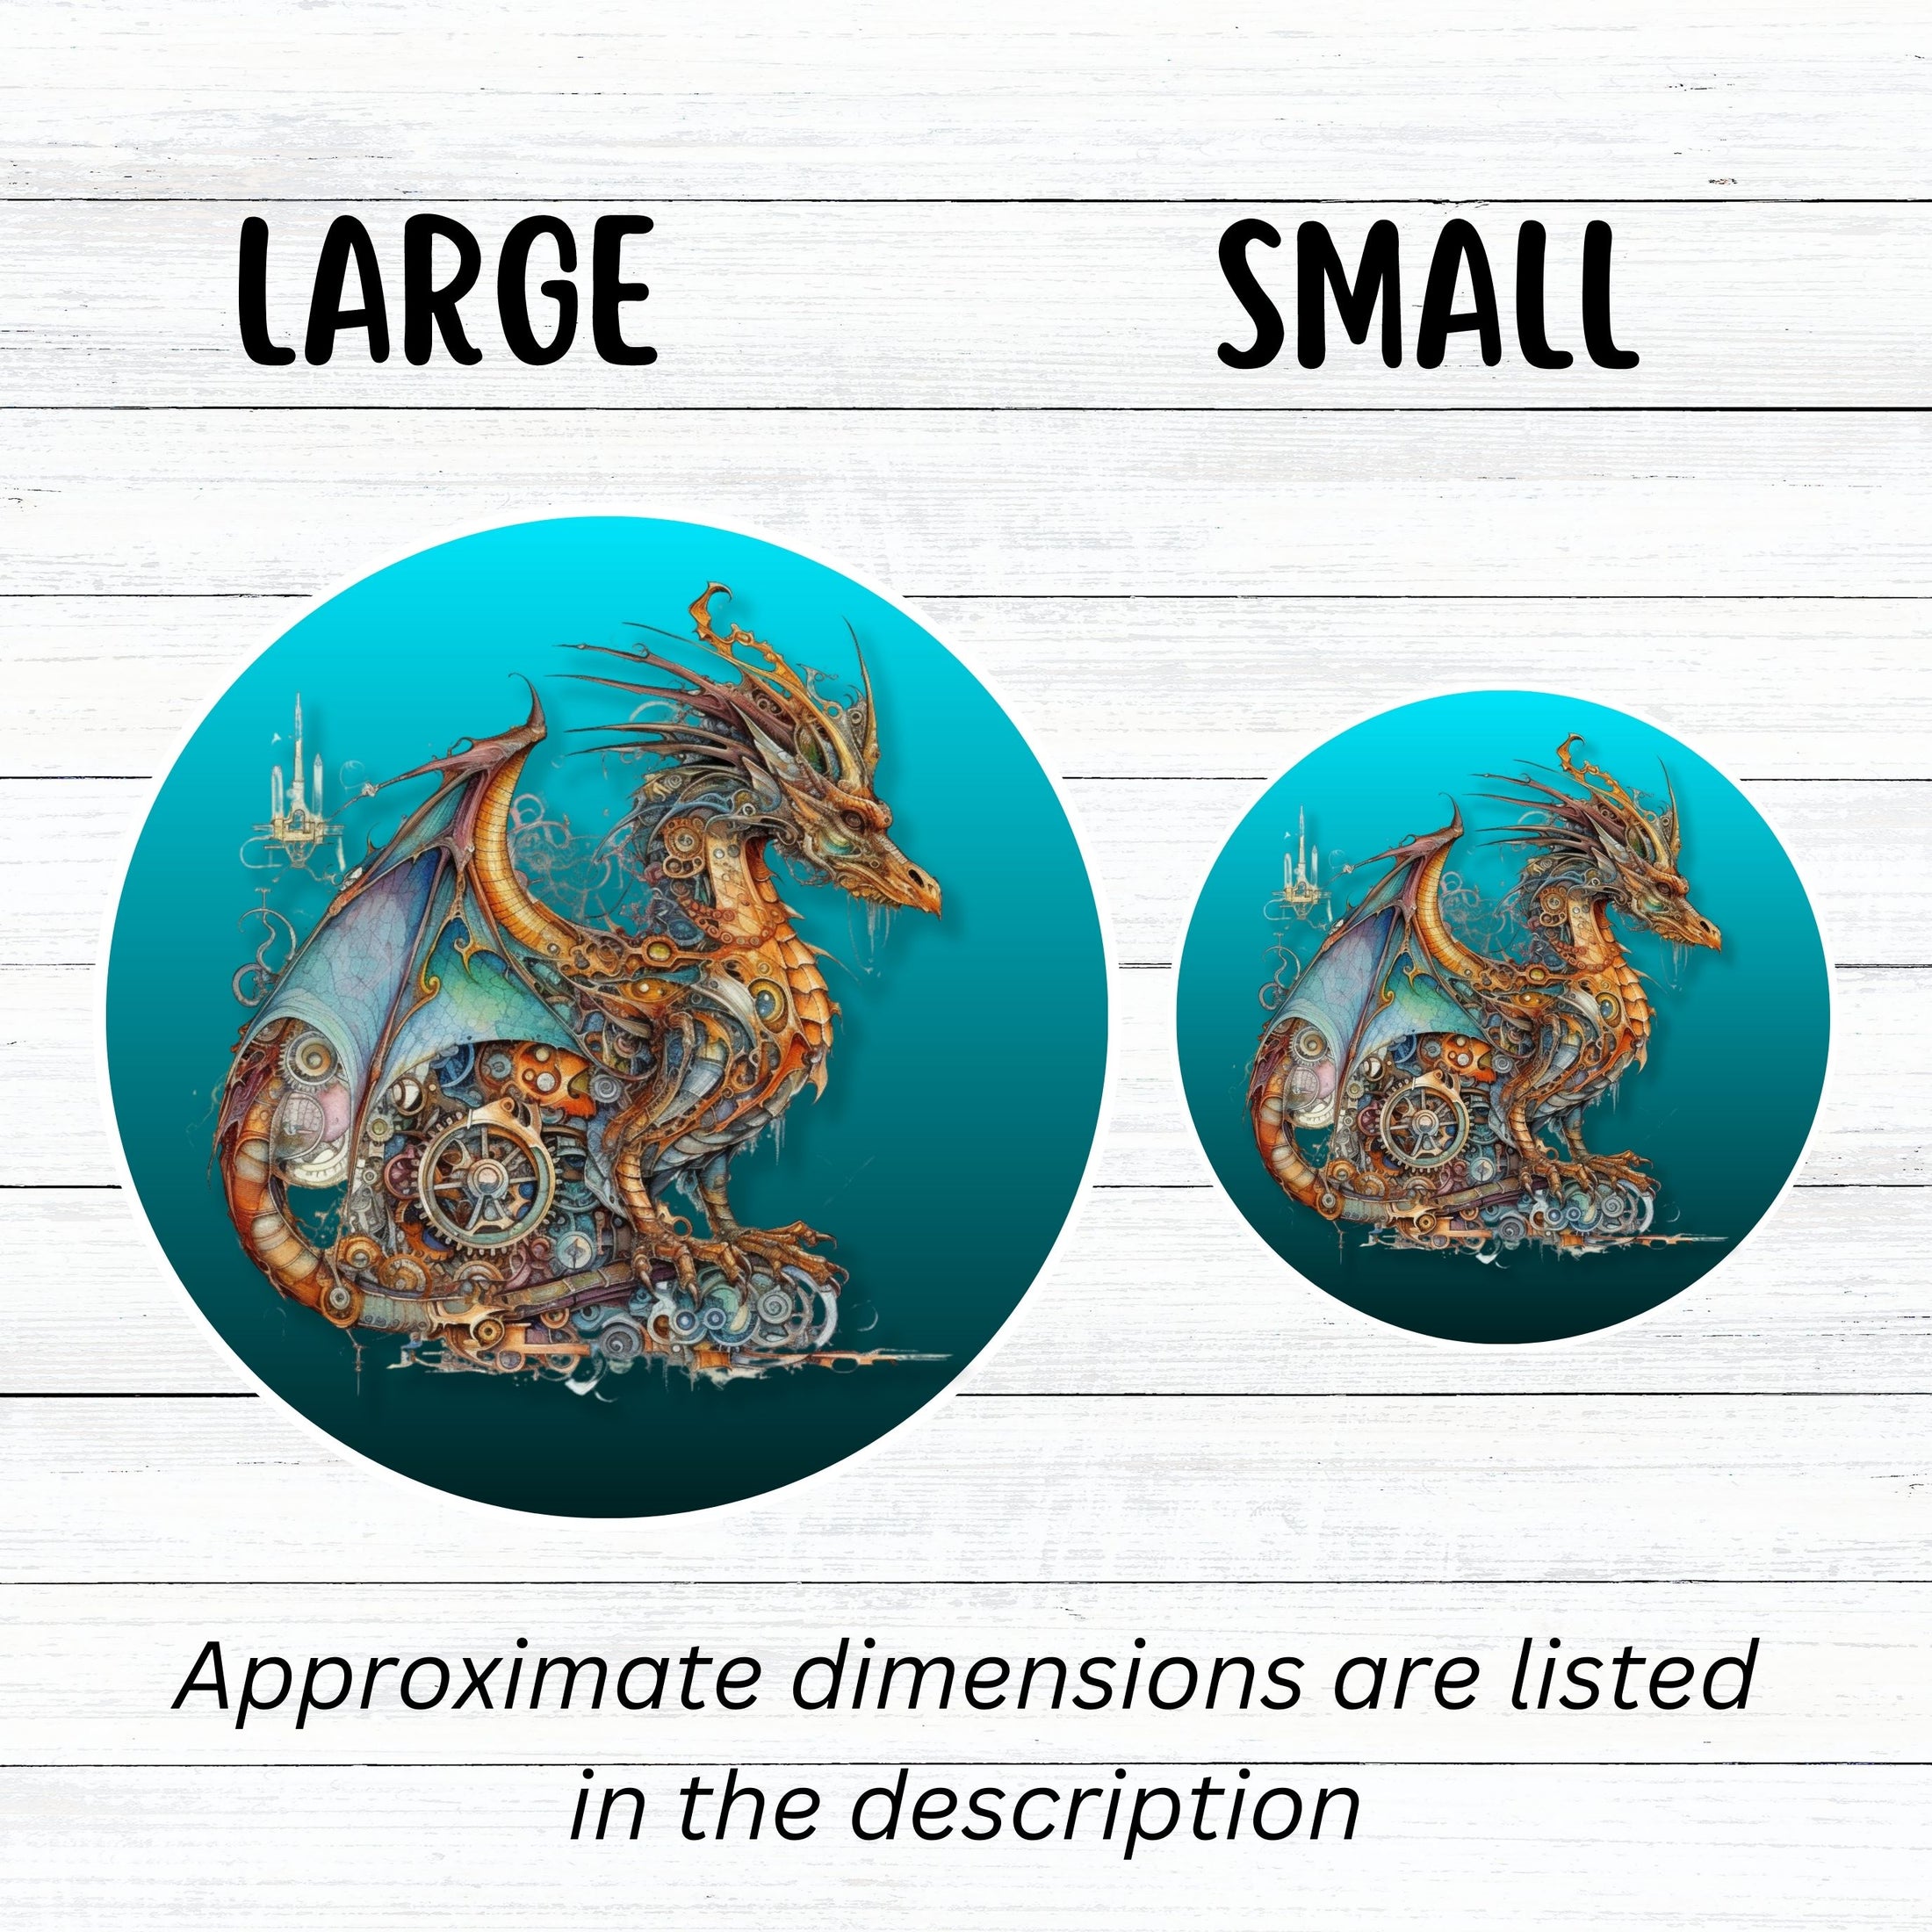 This image shows large and small steampunk dragon stickers next to each other.